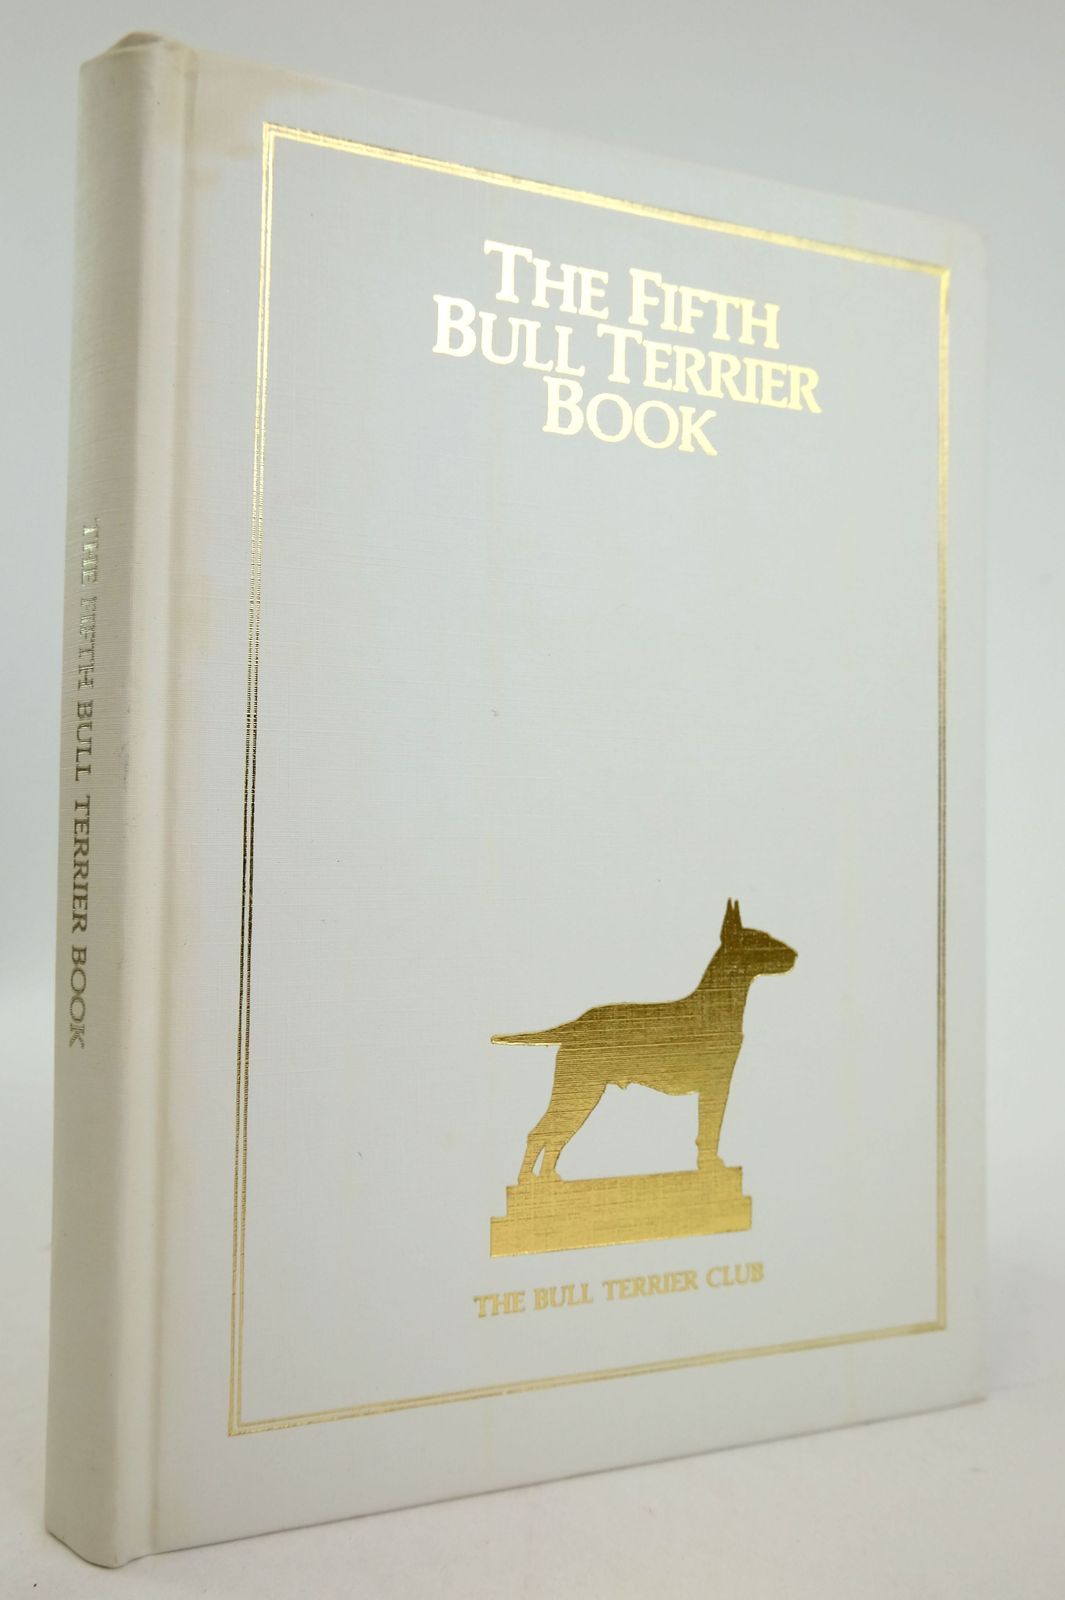 Photo of THE FIFTH BULL TERRIER BOOK written by Sweeten, Margaret O. published by The Bull Terrier Club (STOCK CODE: 1819692)  for sale by Stella & Rose's Books